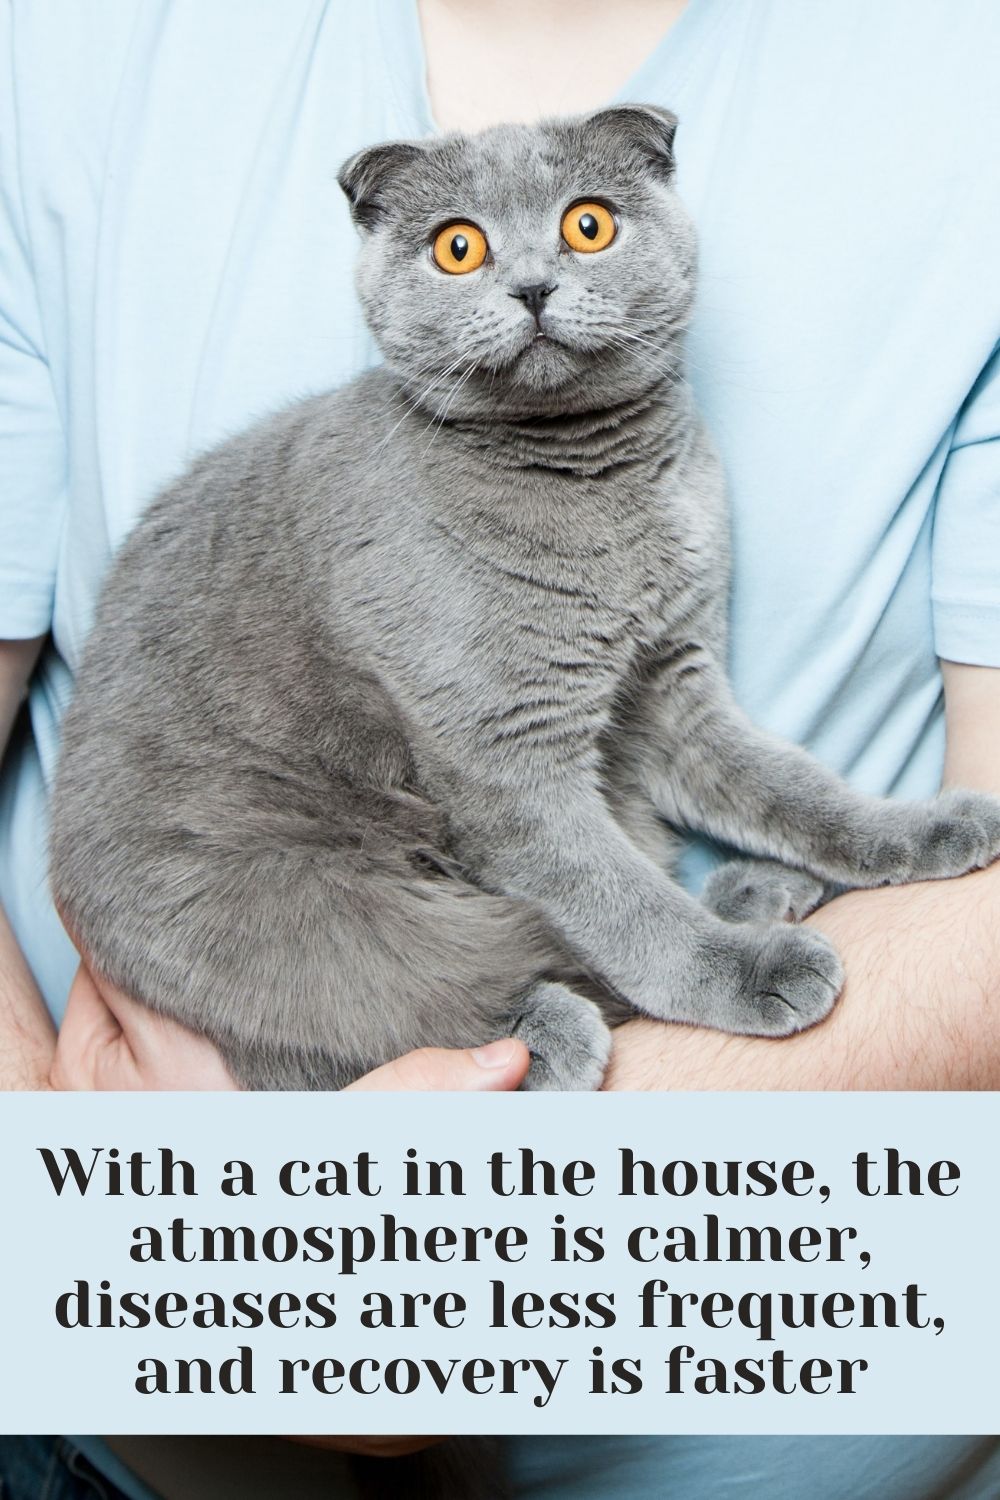 With a cat in the house, the atmosphere is calmer, diseases are less frequent, and recovery is faster